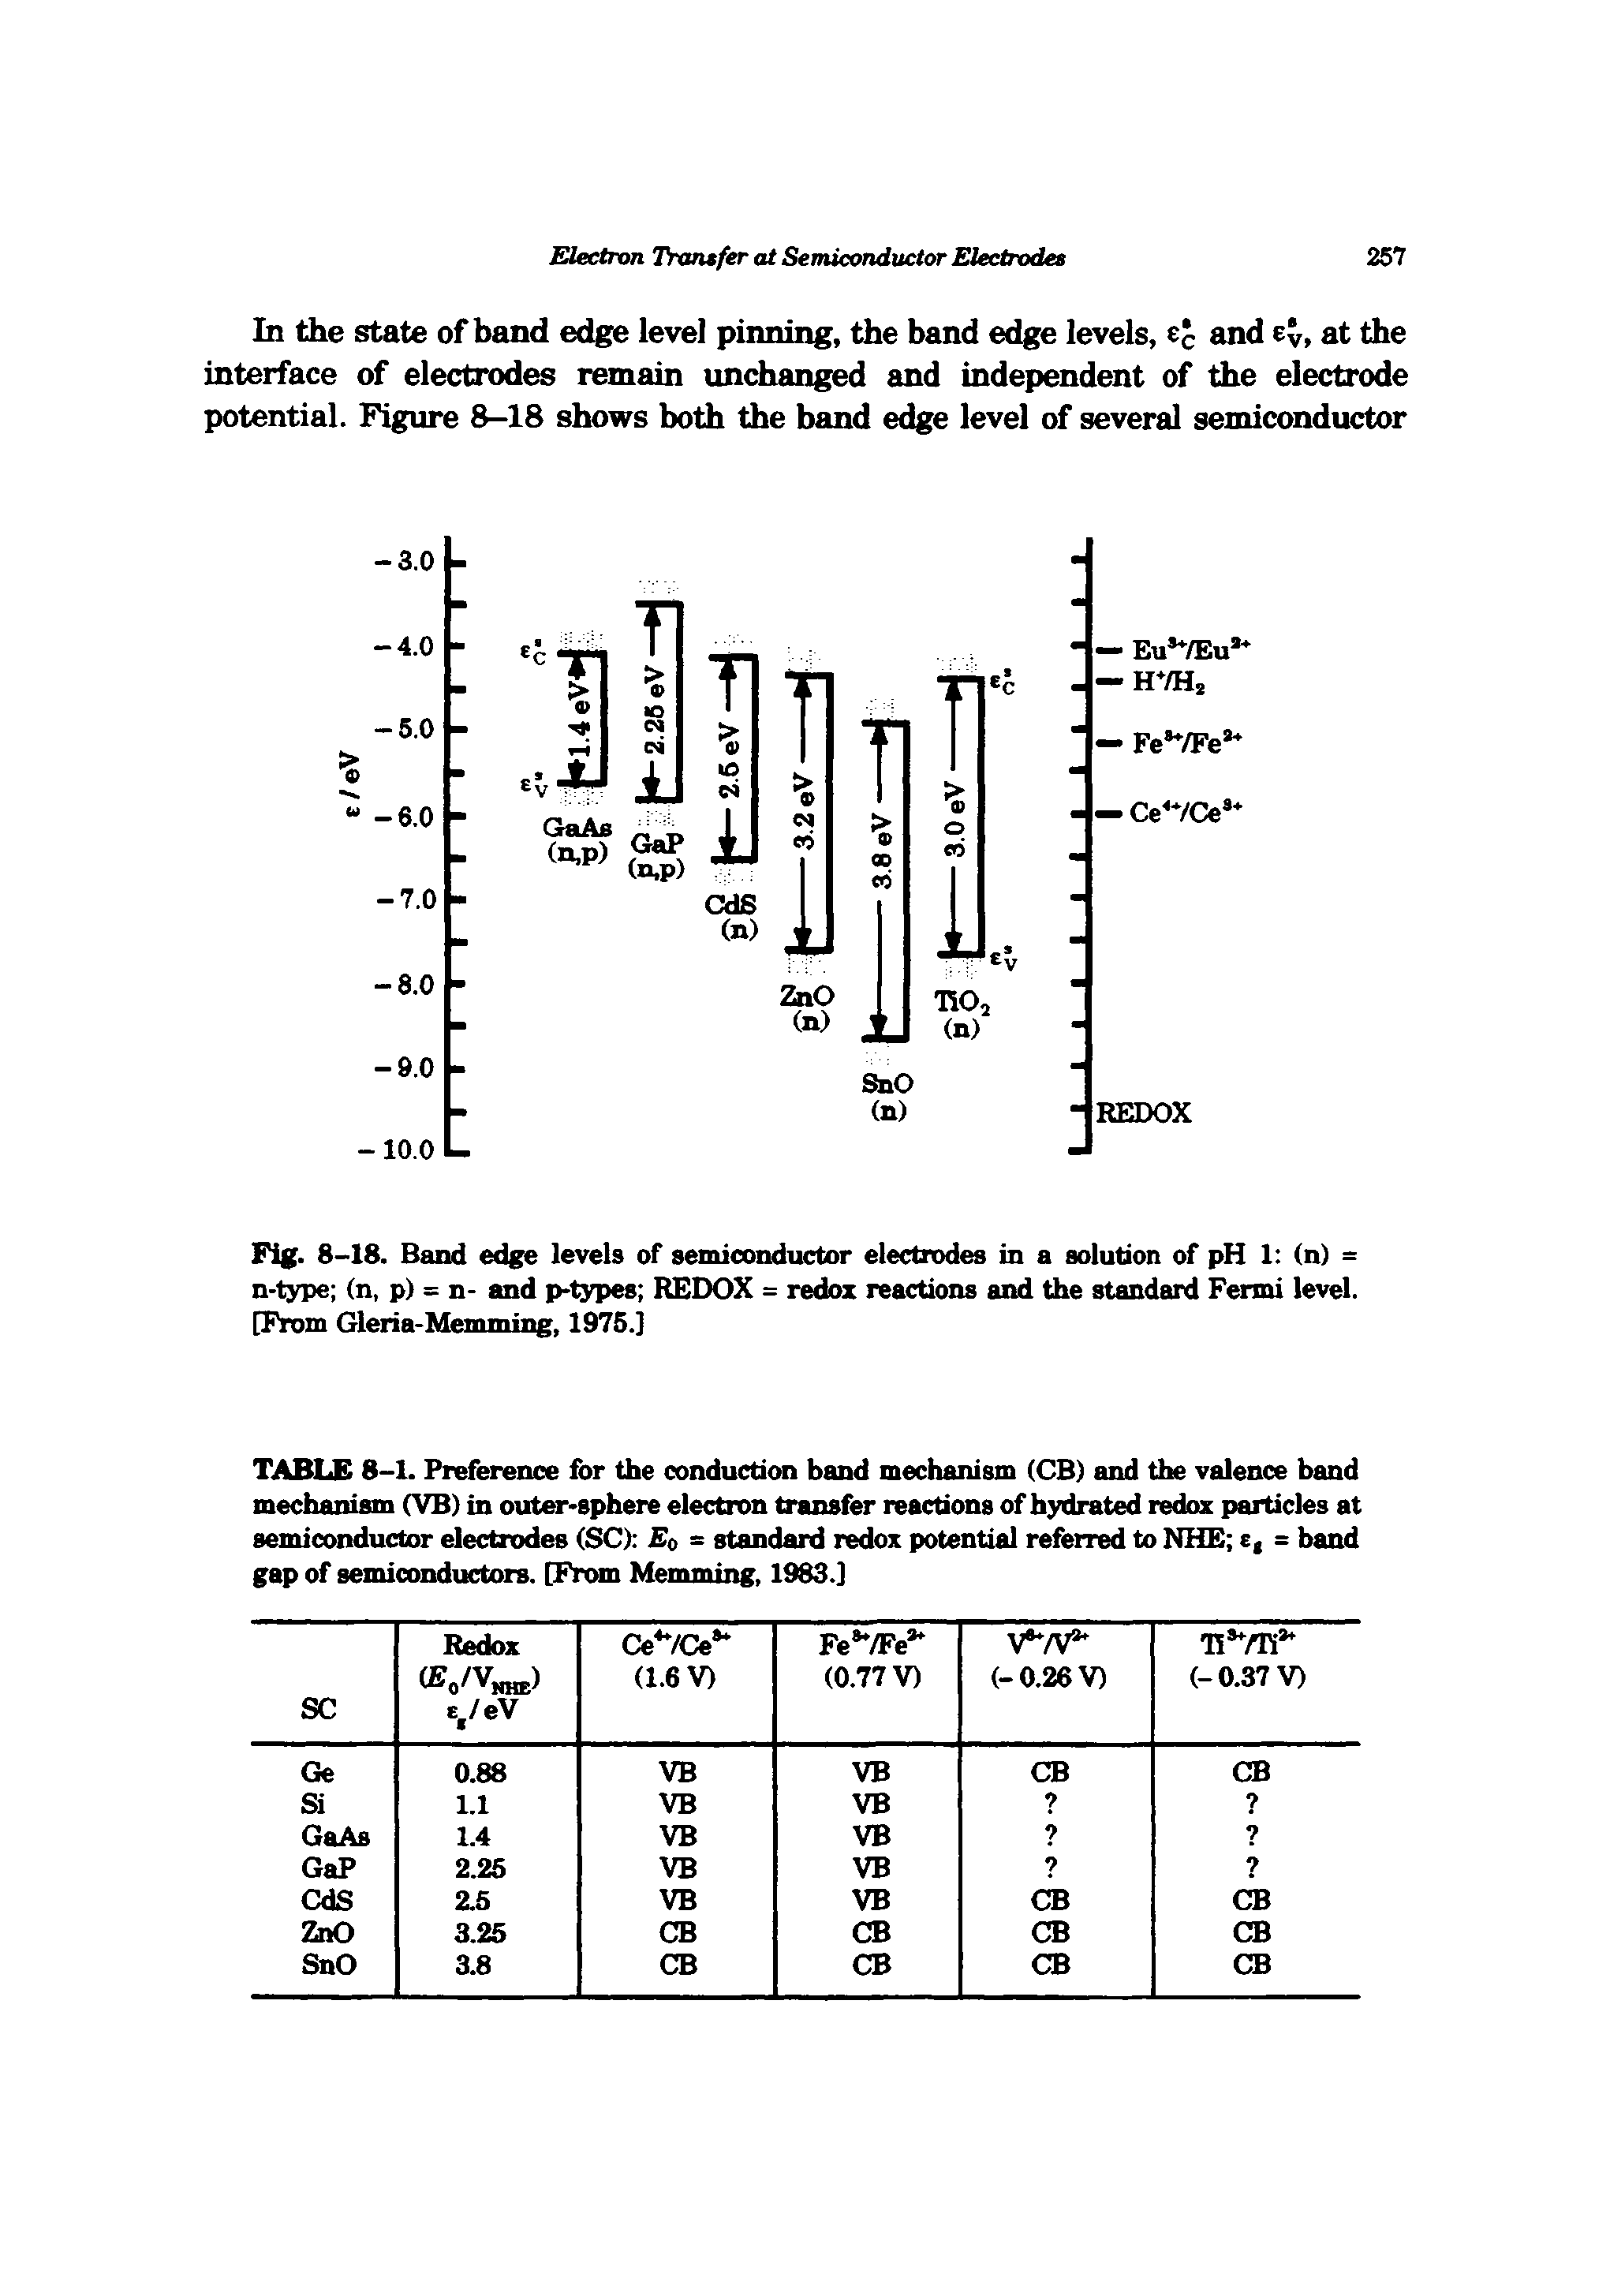 Fig. 8-18. Band edge levels of semiconductor electrodes in a solution of pH 1 (n) = n-type (n, p) = n- and p types REDOX = redox reactions and the standard Fermi level. [From Gleria-Memming, 1975.]...